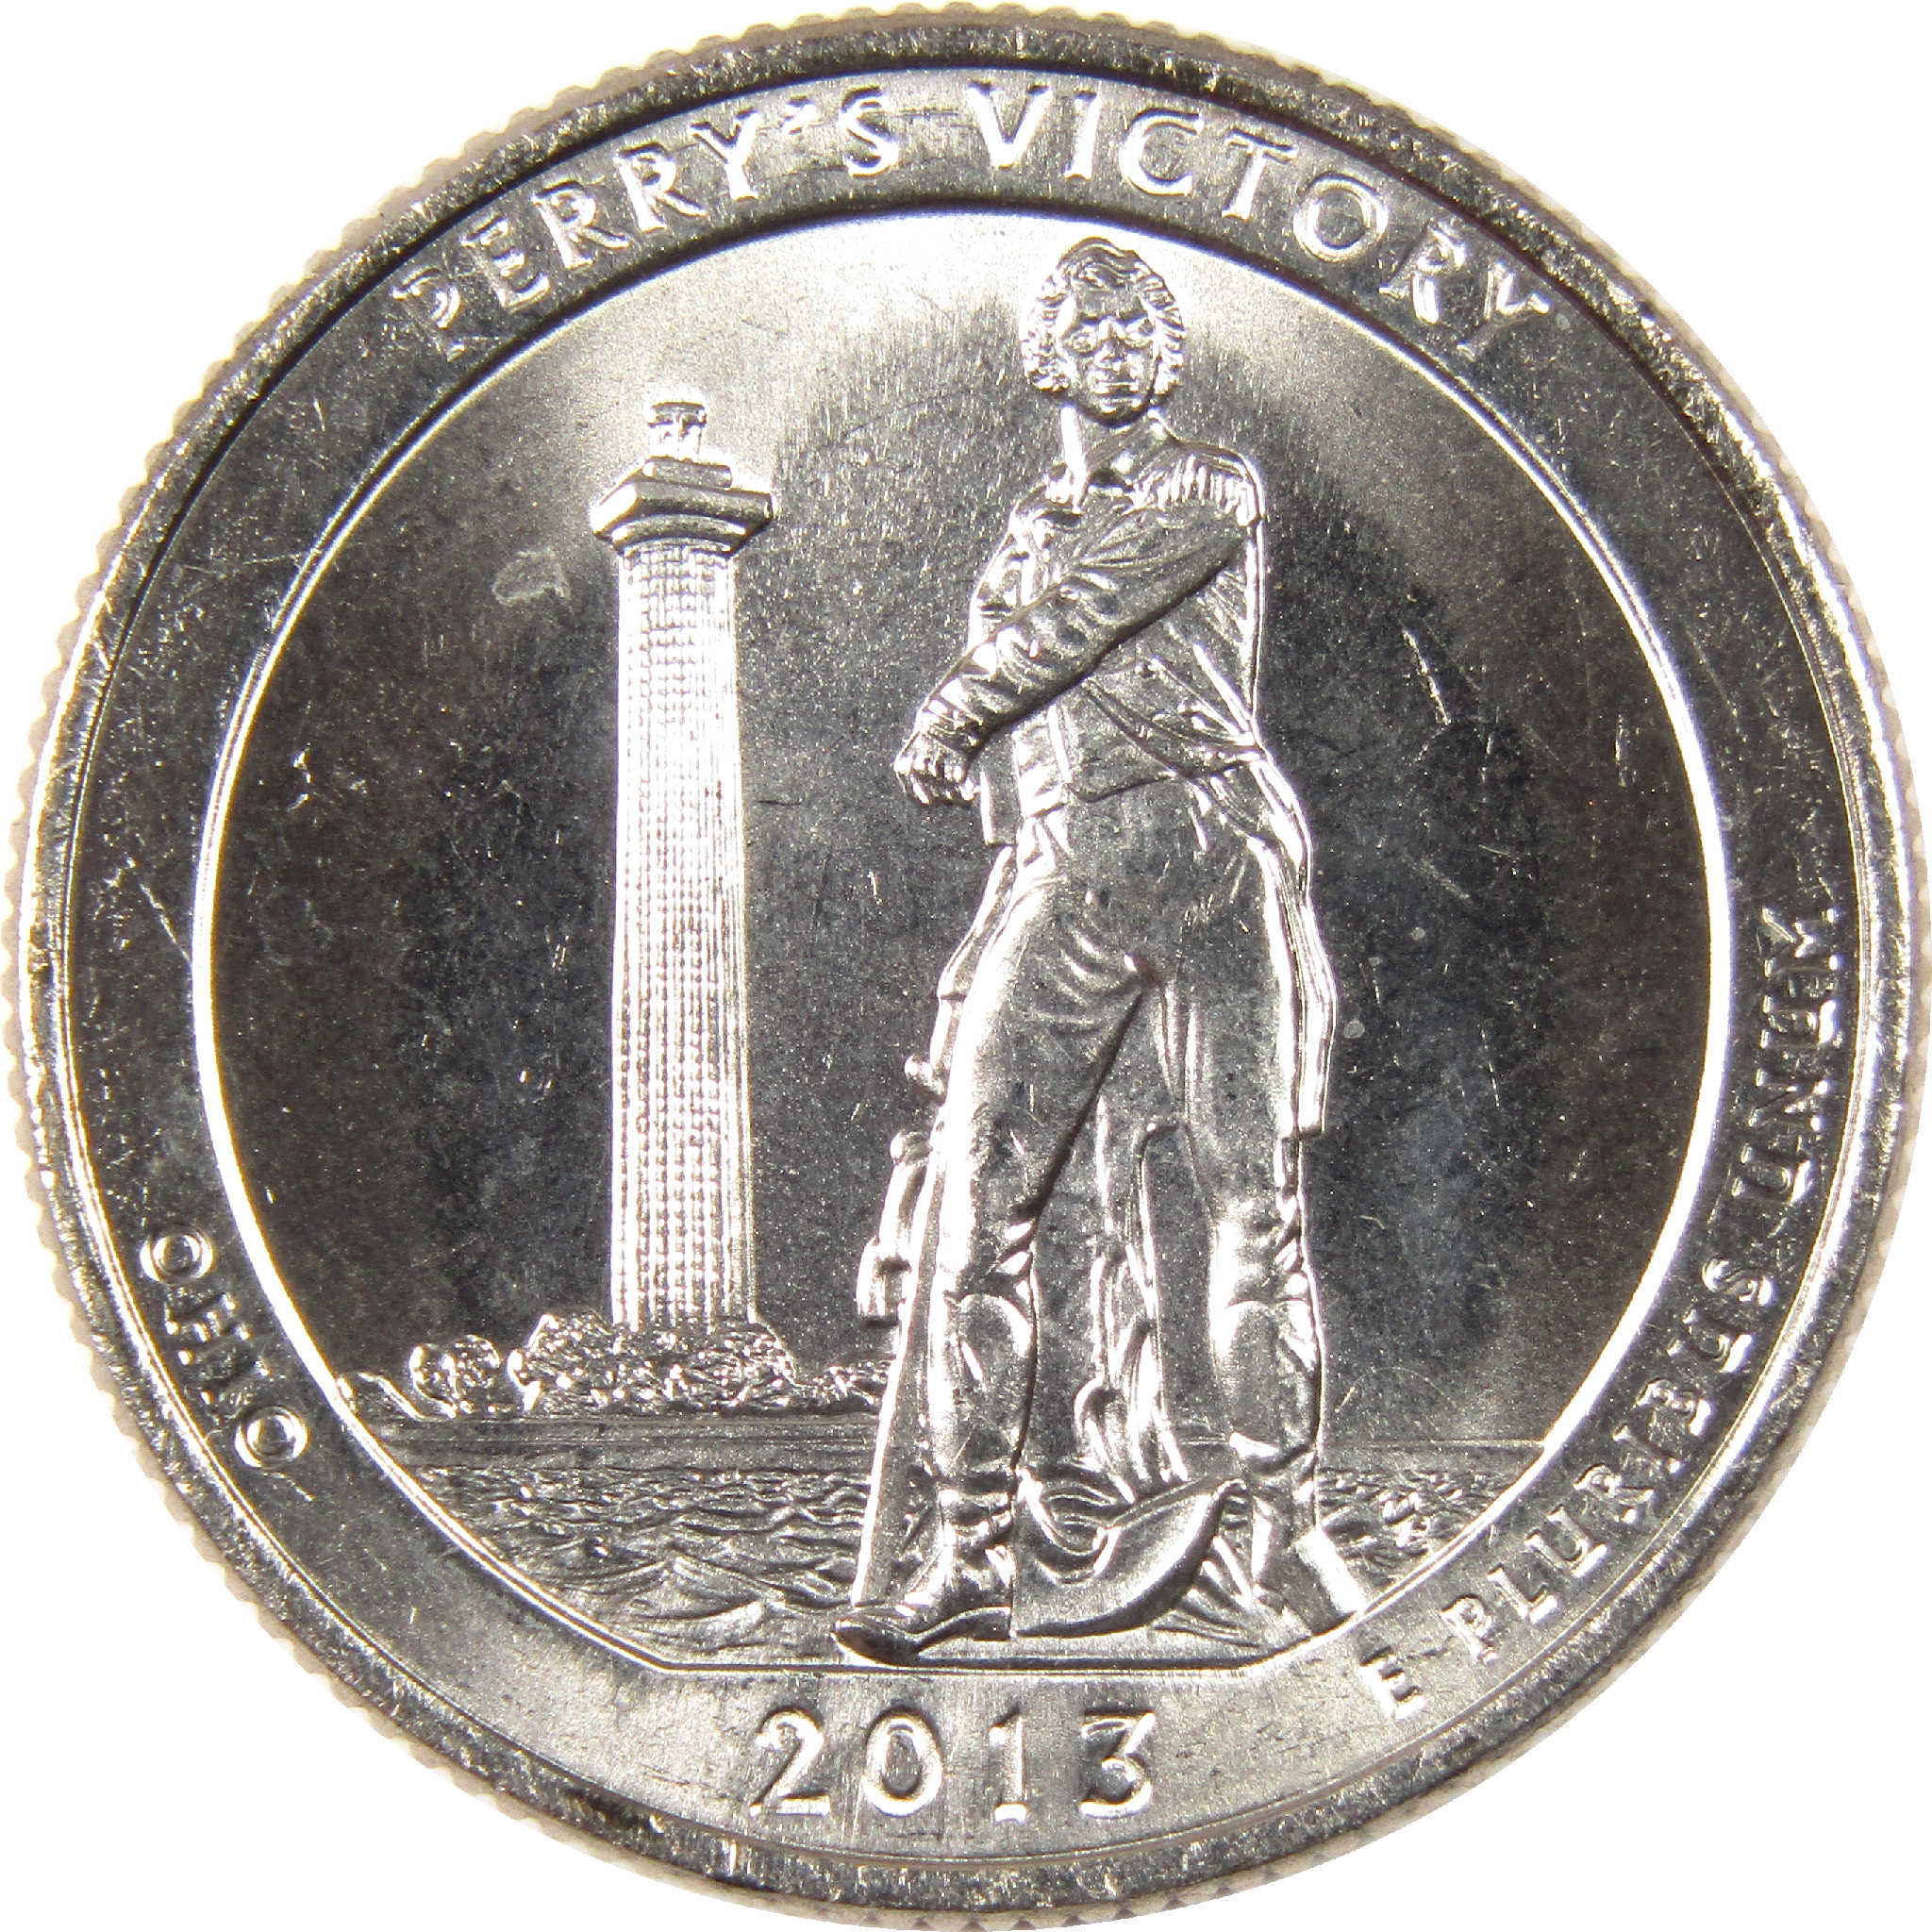 2013 S Perry's Victory National Park Quarter BU Uncirculated Clad 25c